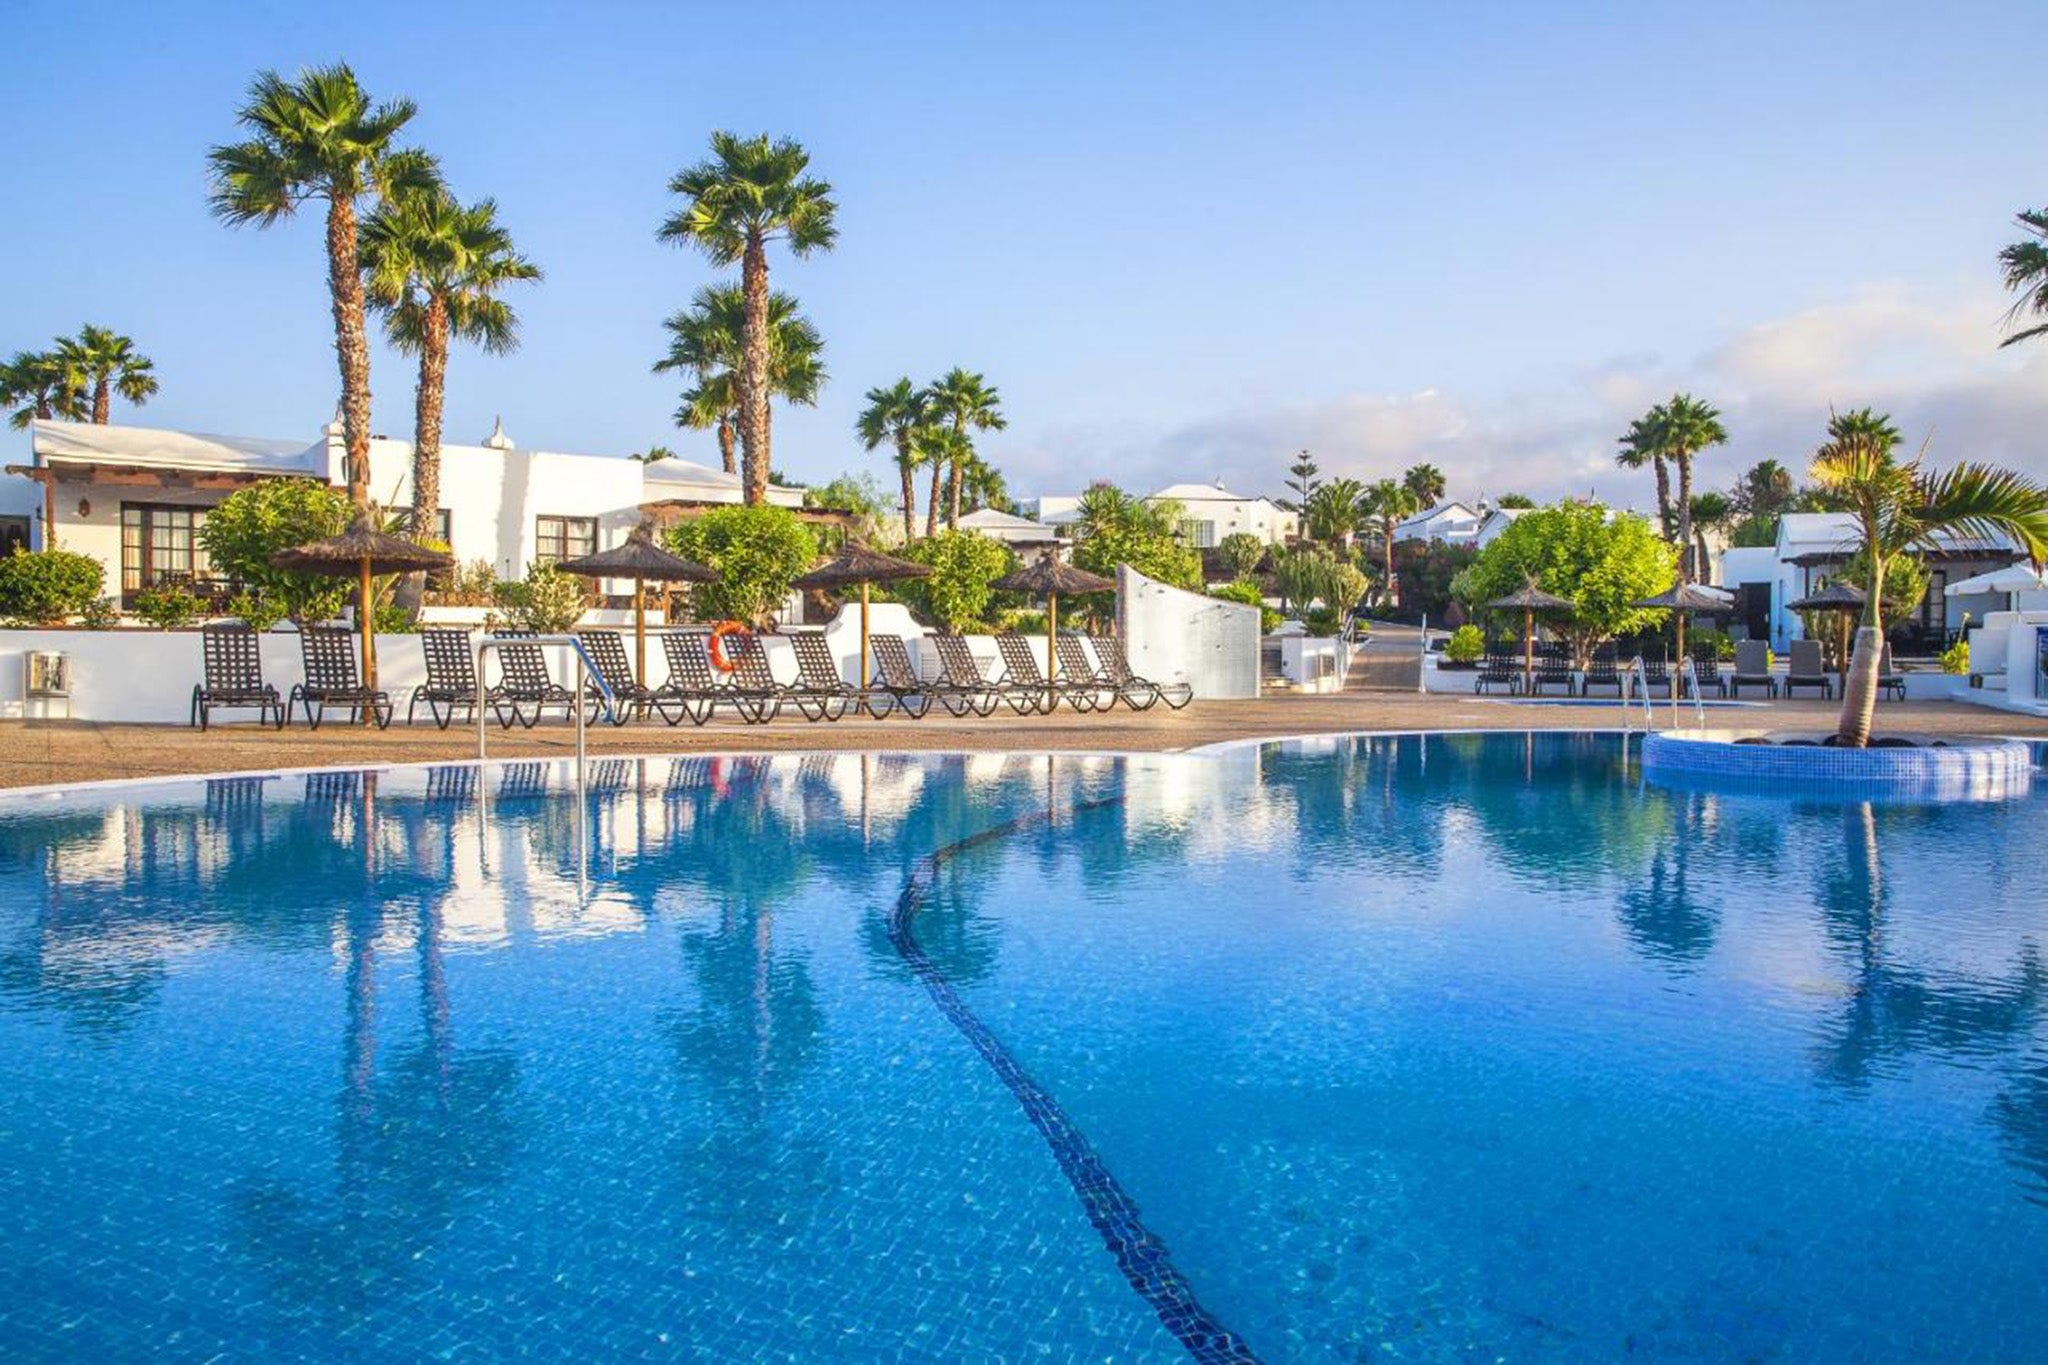 If you can tear yourself away from the pool, Playa Blanca is a short walk away